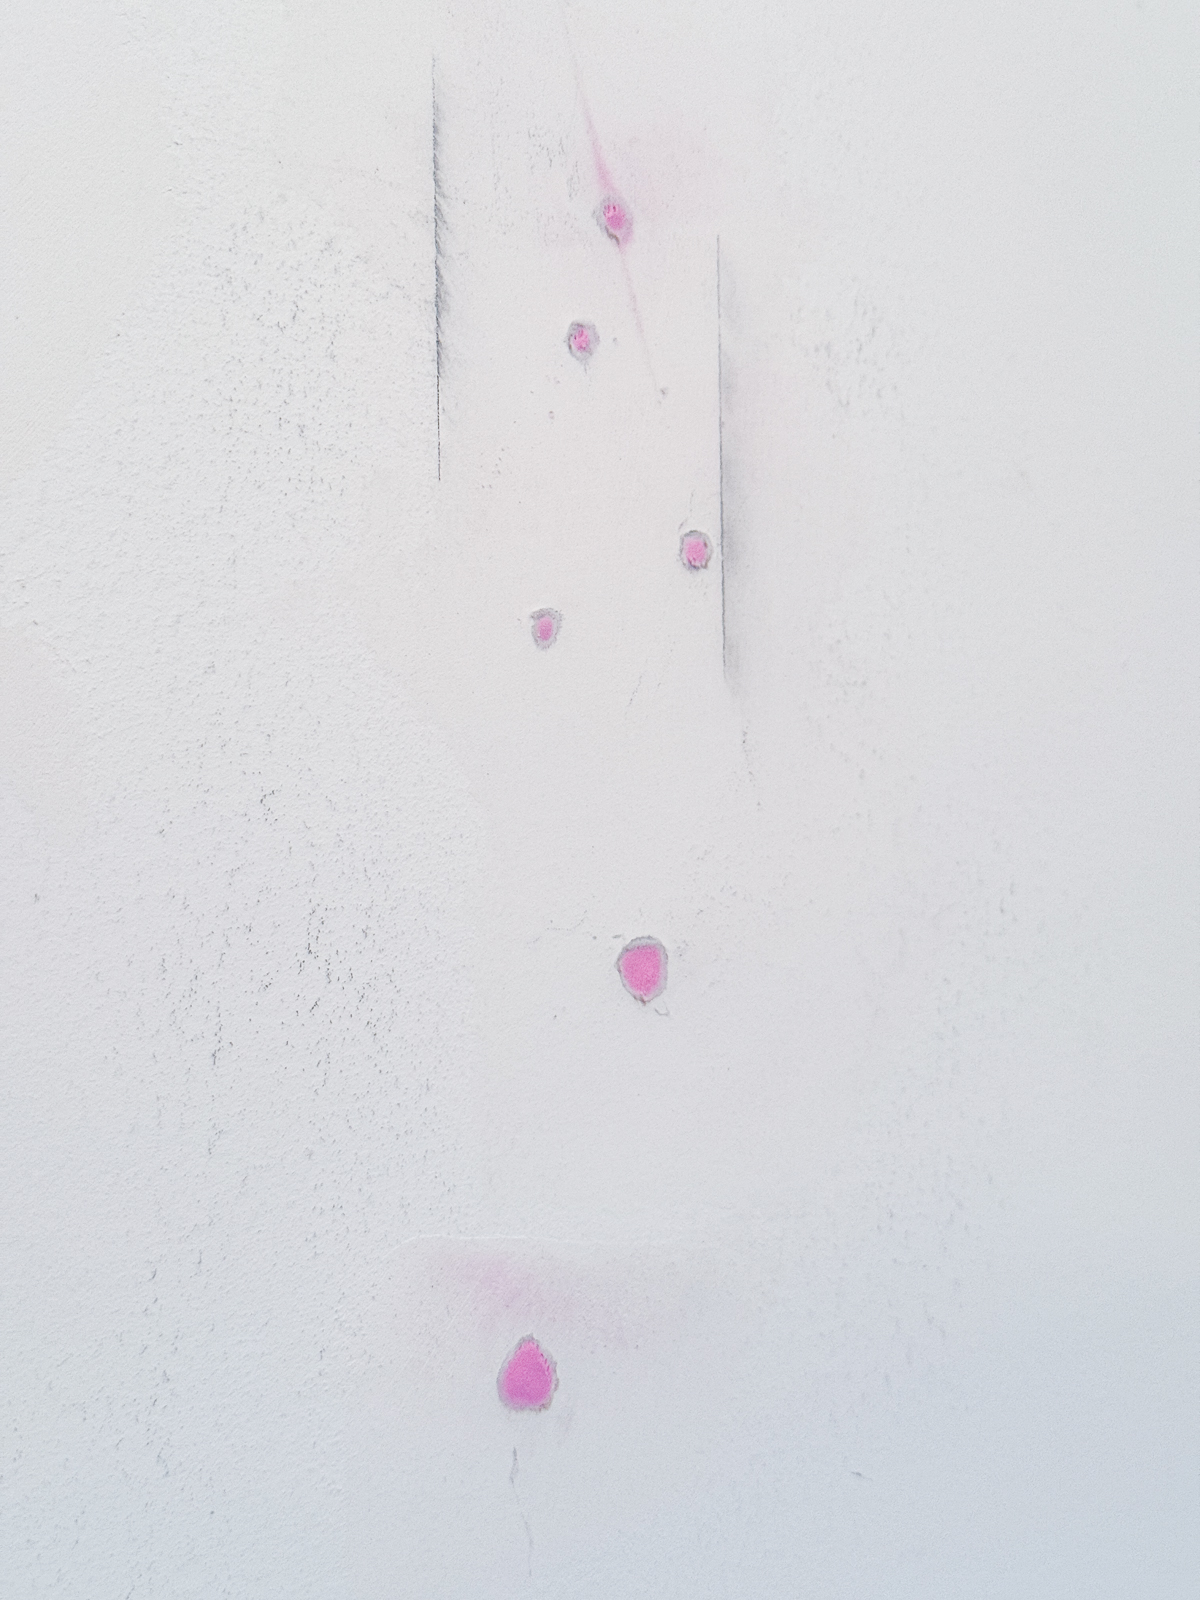 drywall anchor holes filled with spackle that changes from pink to white when dry